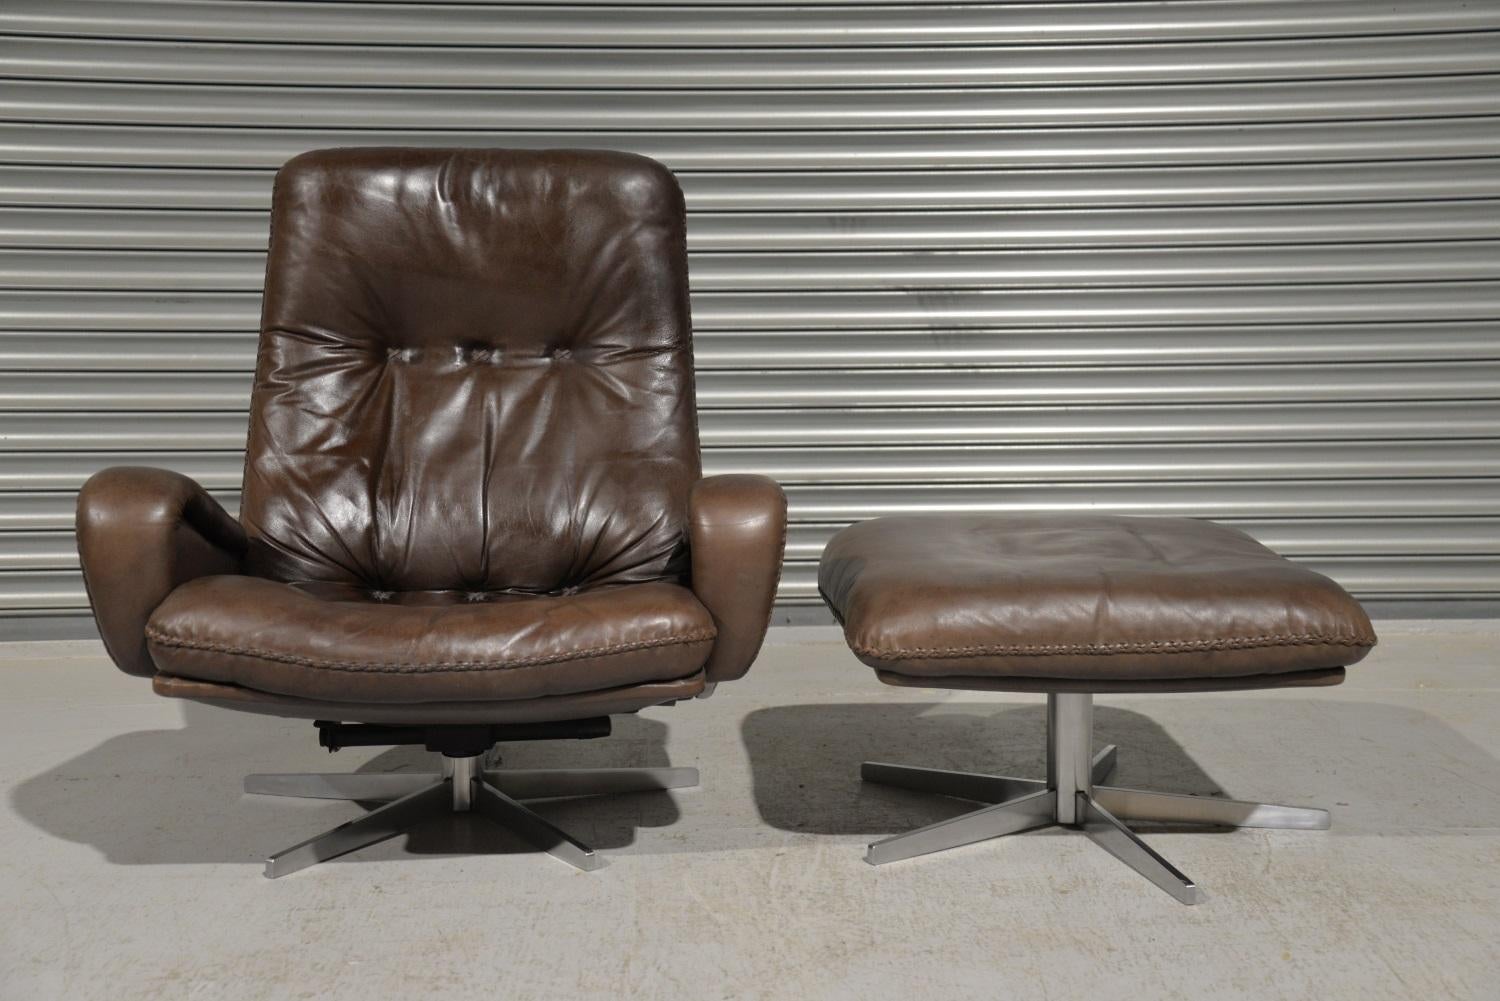 We are delighted to bring to you an ultra-rare and highly desirable vintage 1960s De Sede S 231 James Bond swivel leather armchair with ottoman. This same swivel leather armchair and ottoman were used as a prop in the 1969 James Bond film, On Her